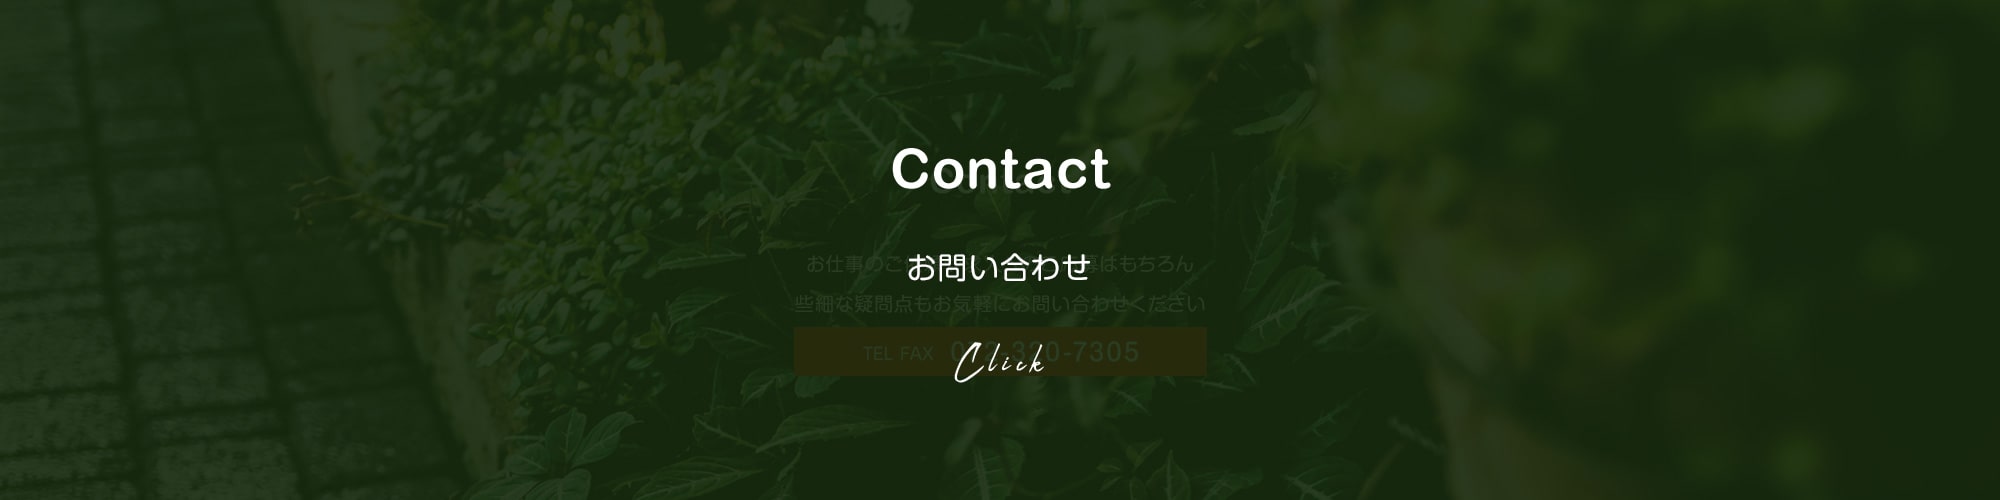 contact_banner_on